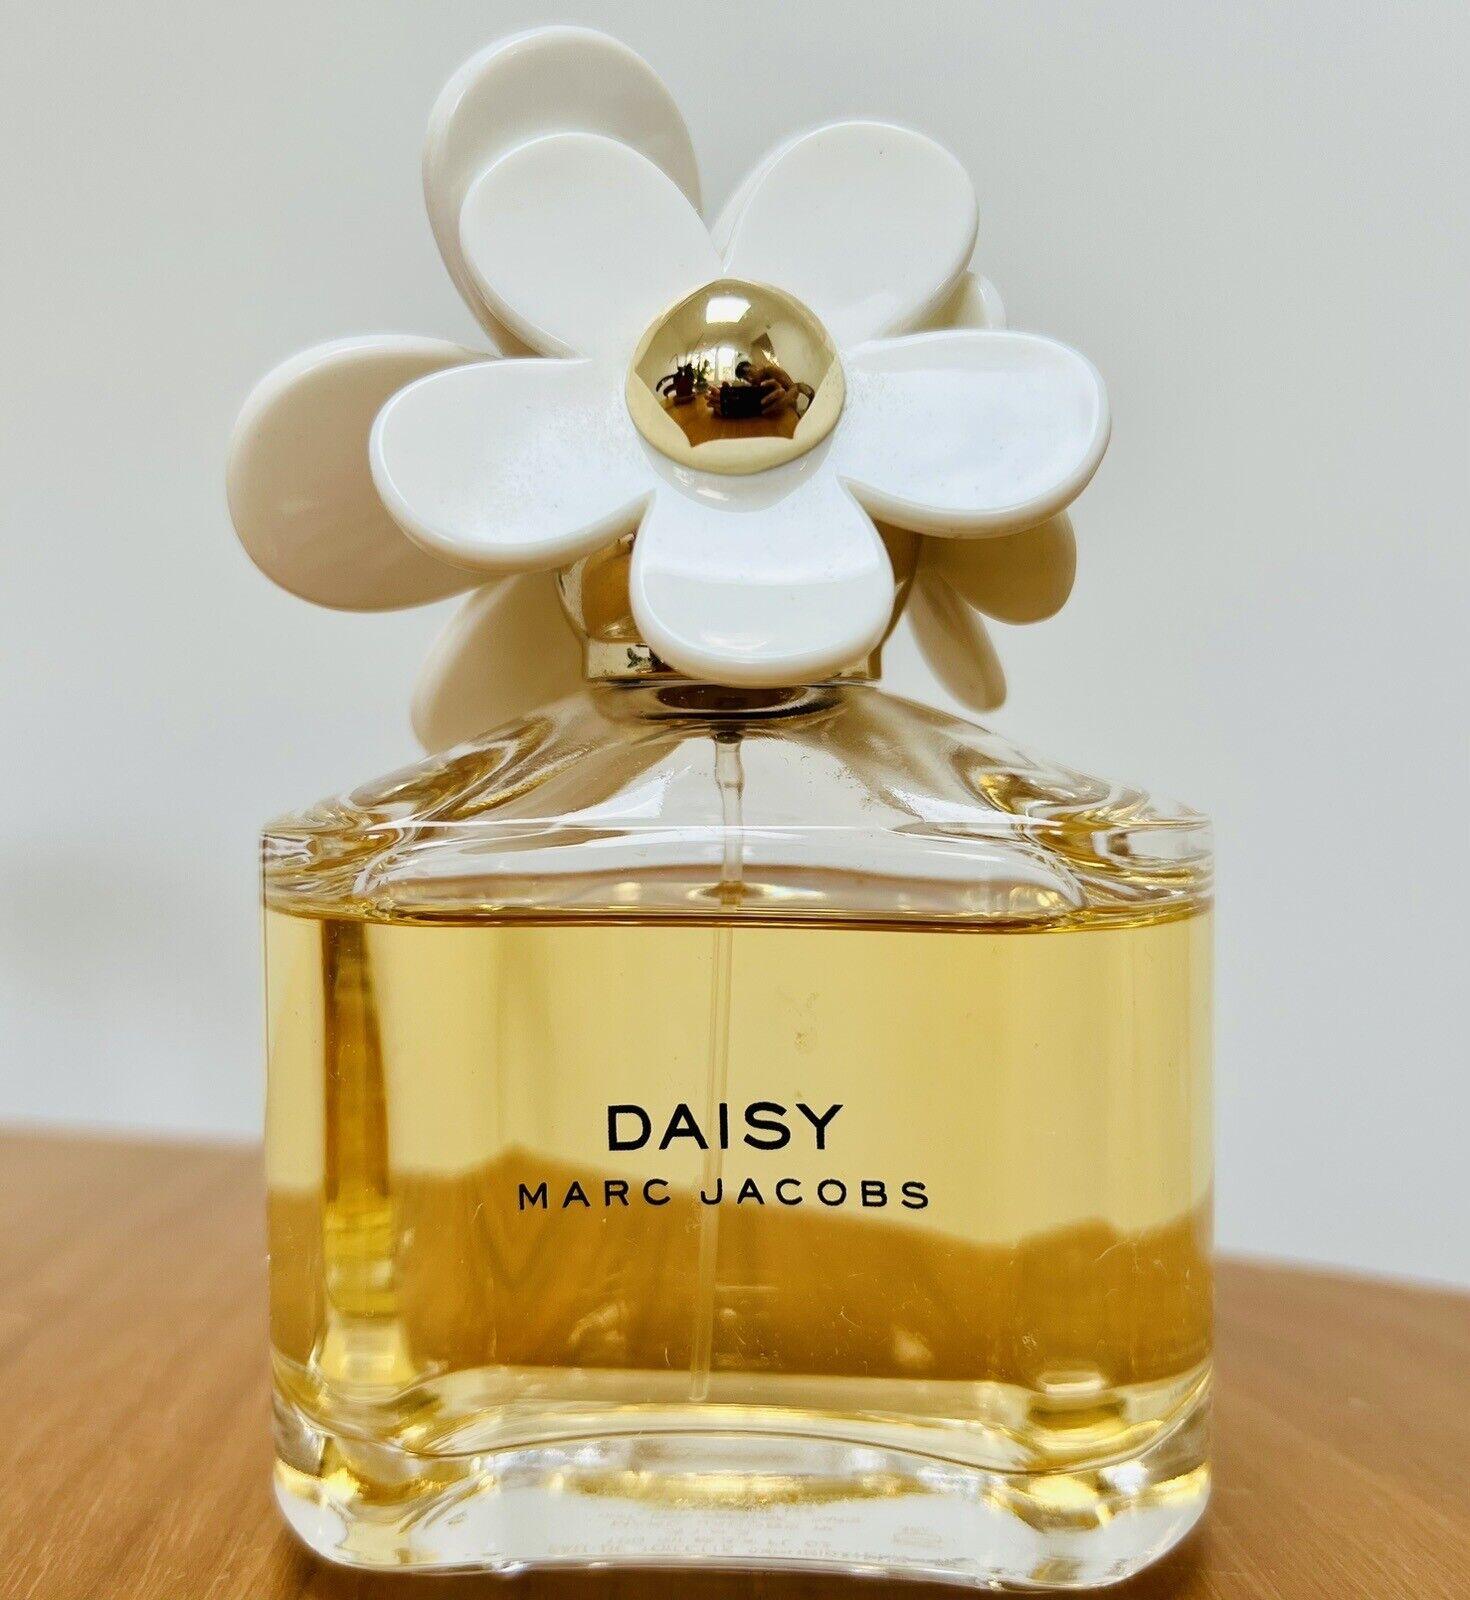 DAISY by MARC JACOBS EDT 100 ml